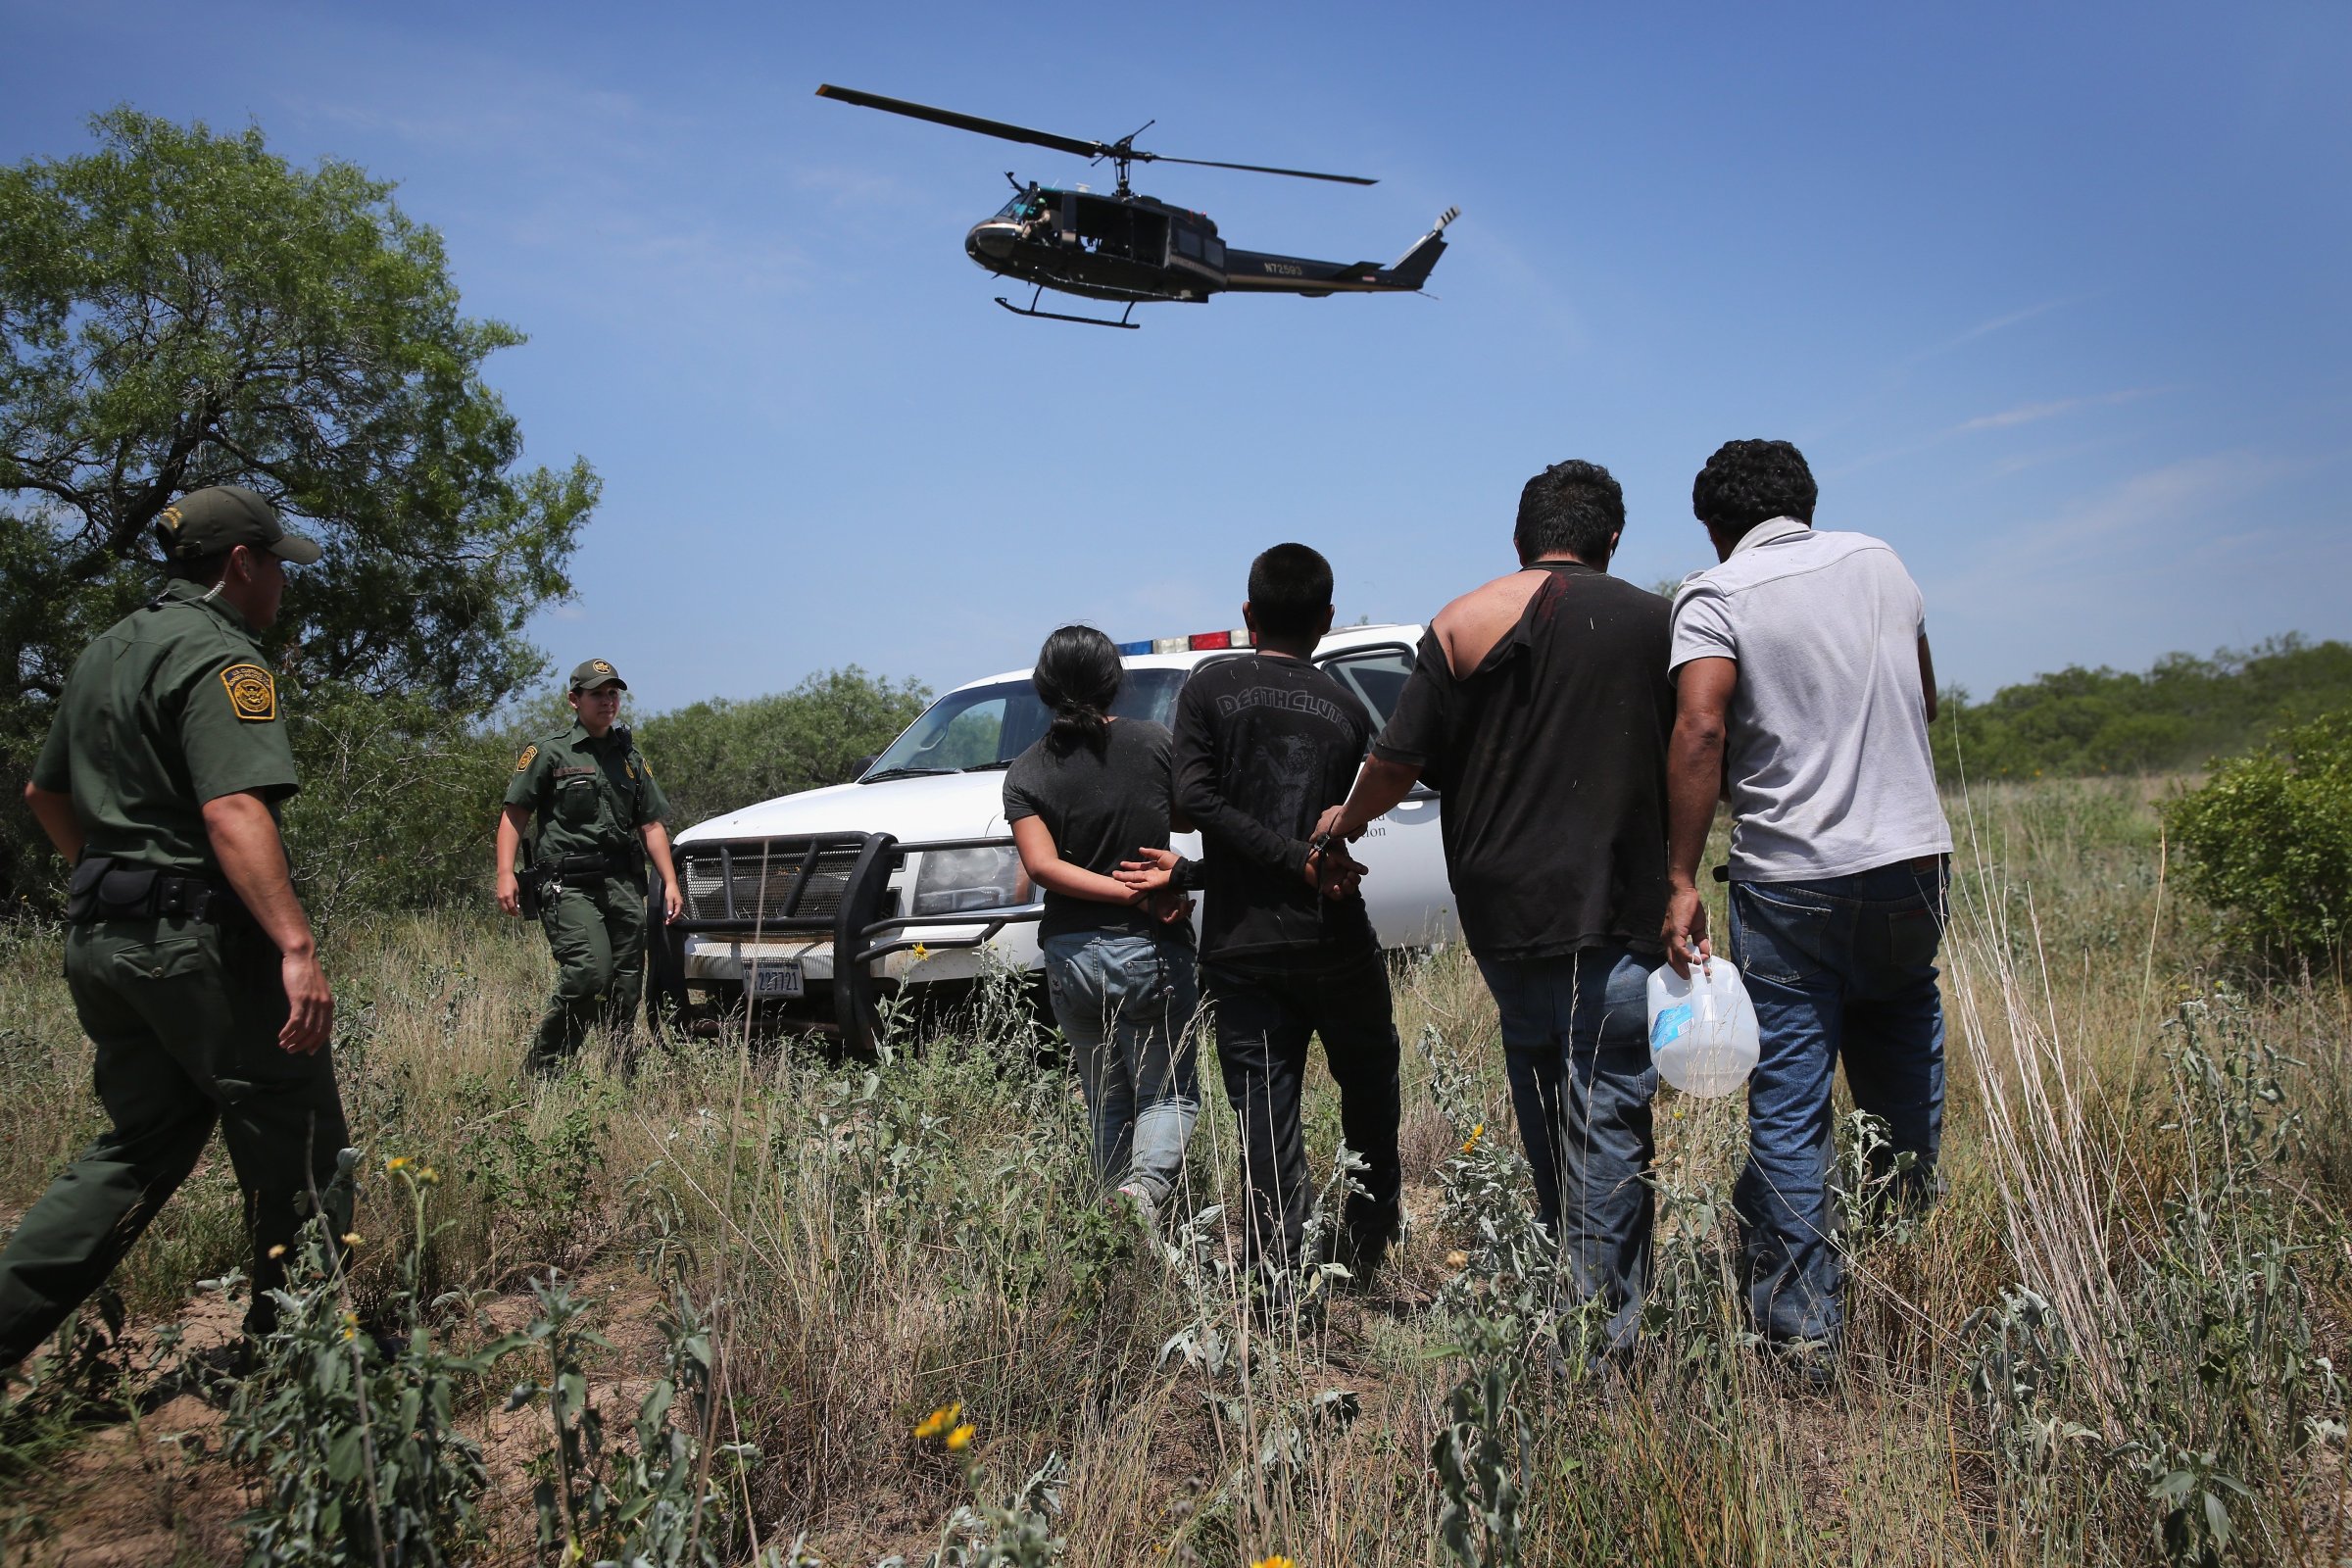 U.S. Customs and Border Protection agents take undocumented immigrants into custody on July 22, 2014 near Falfurrias, Texas.